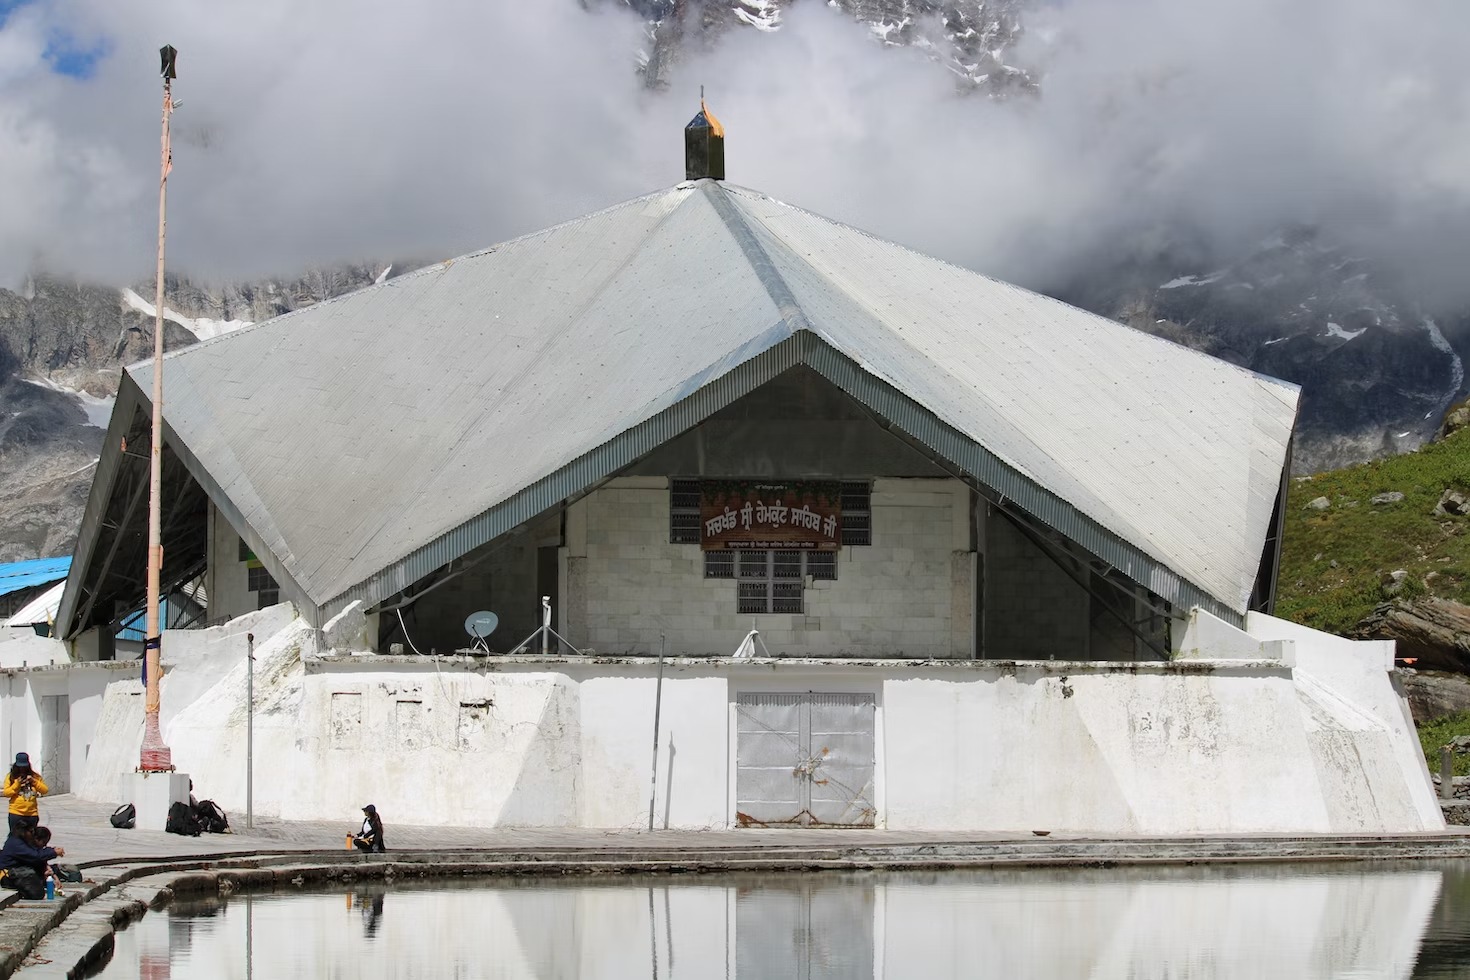 Which is the best time to visit Valley of flowers Hemkund Sahib?